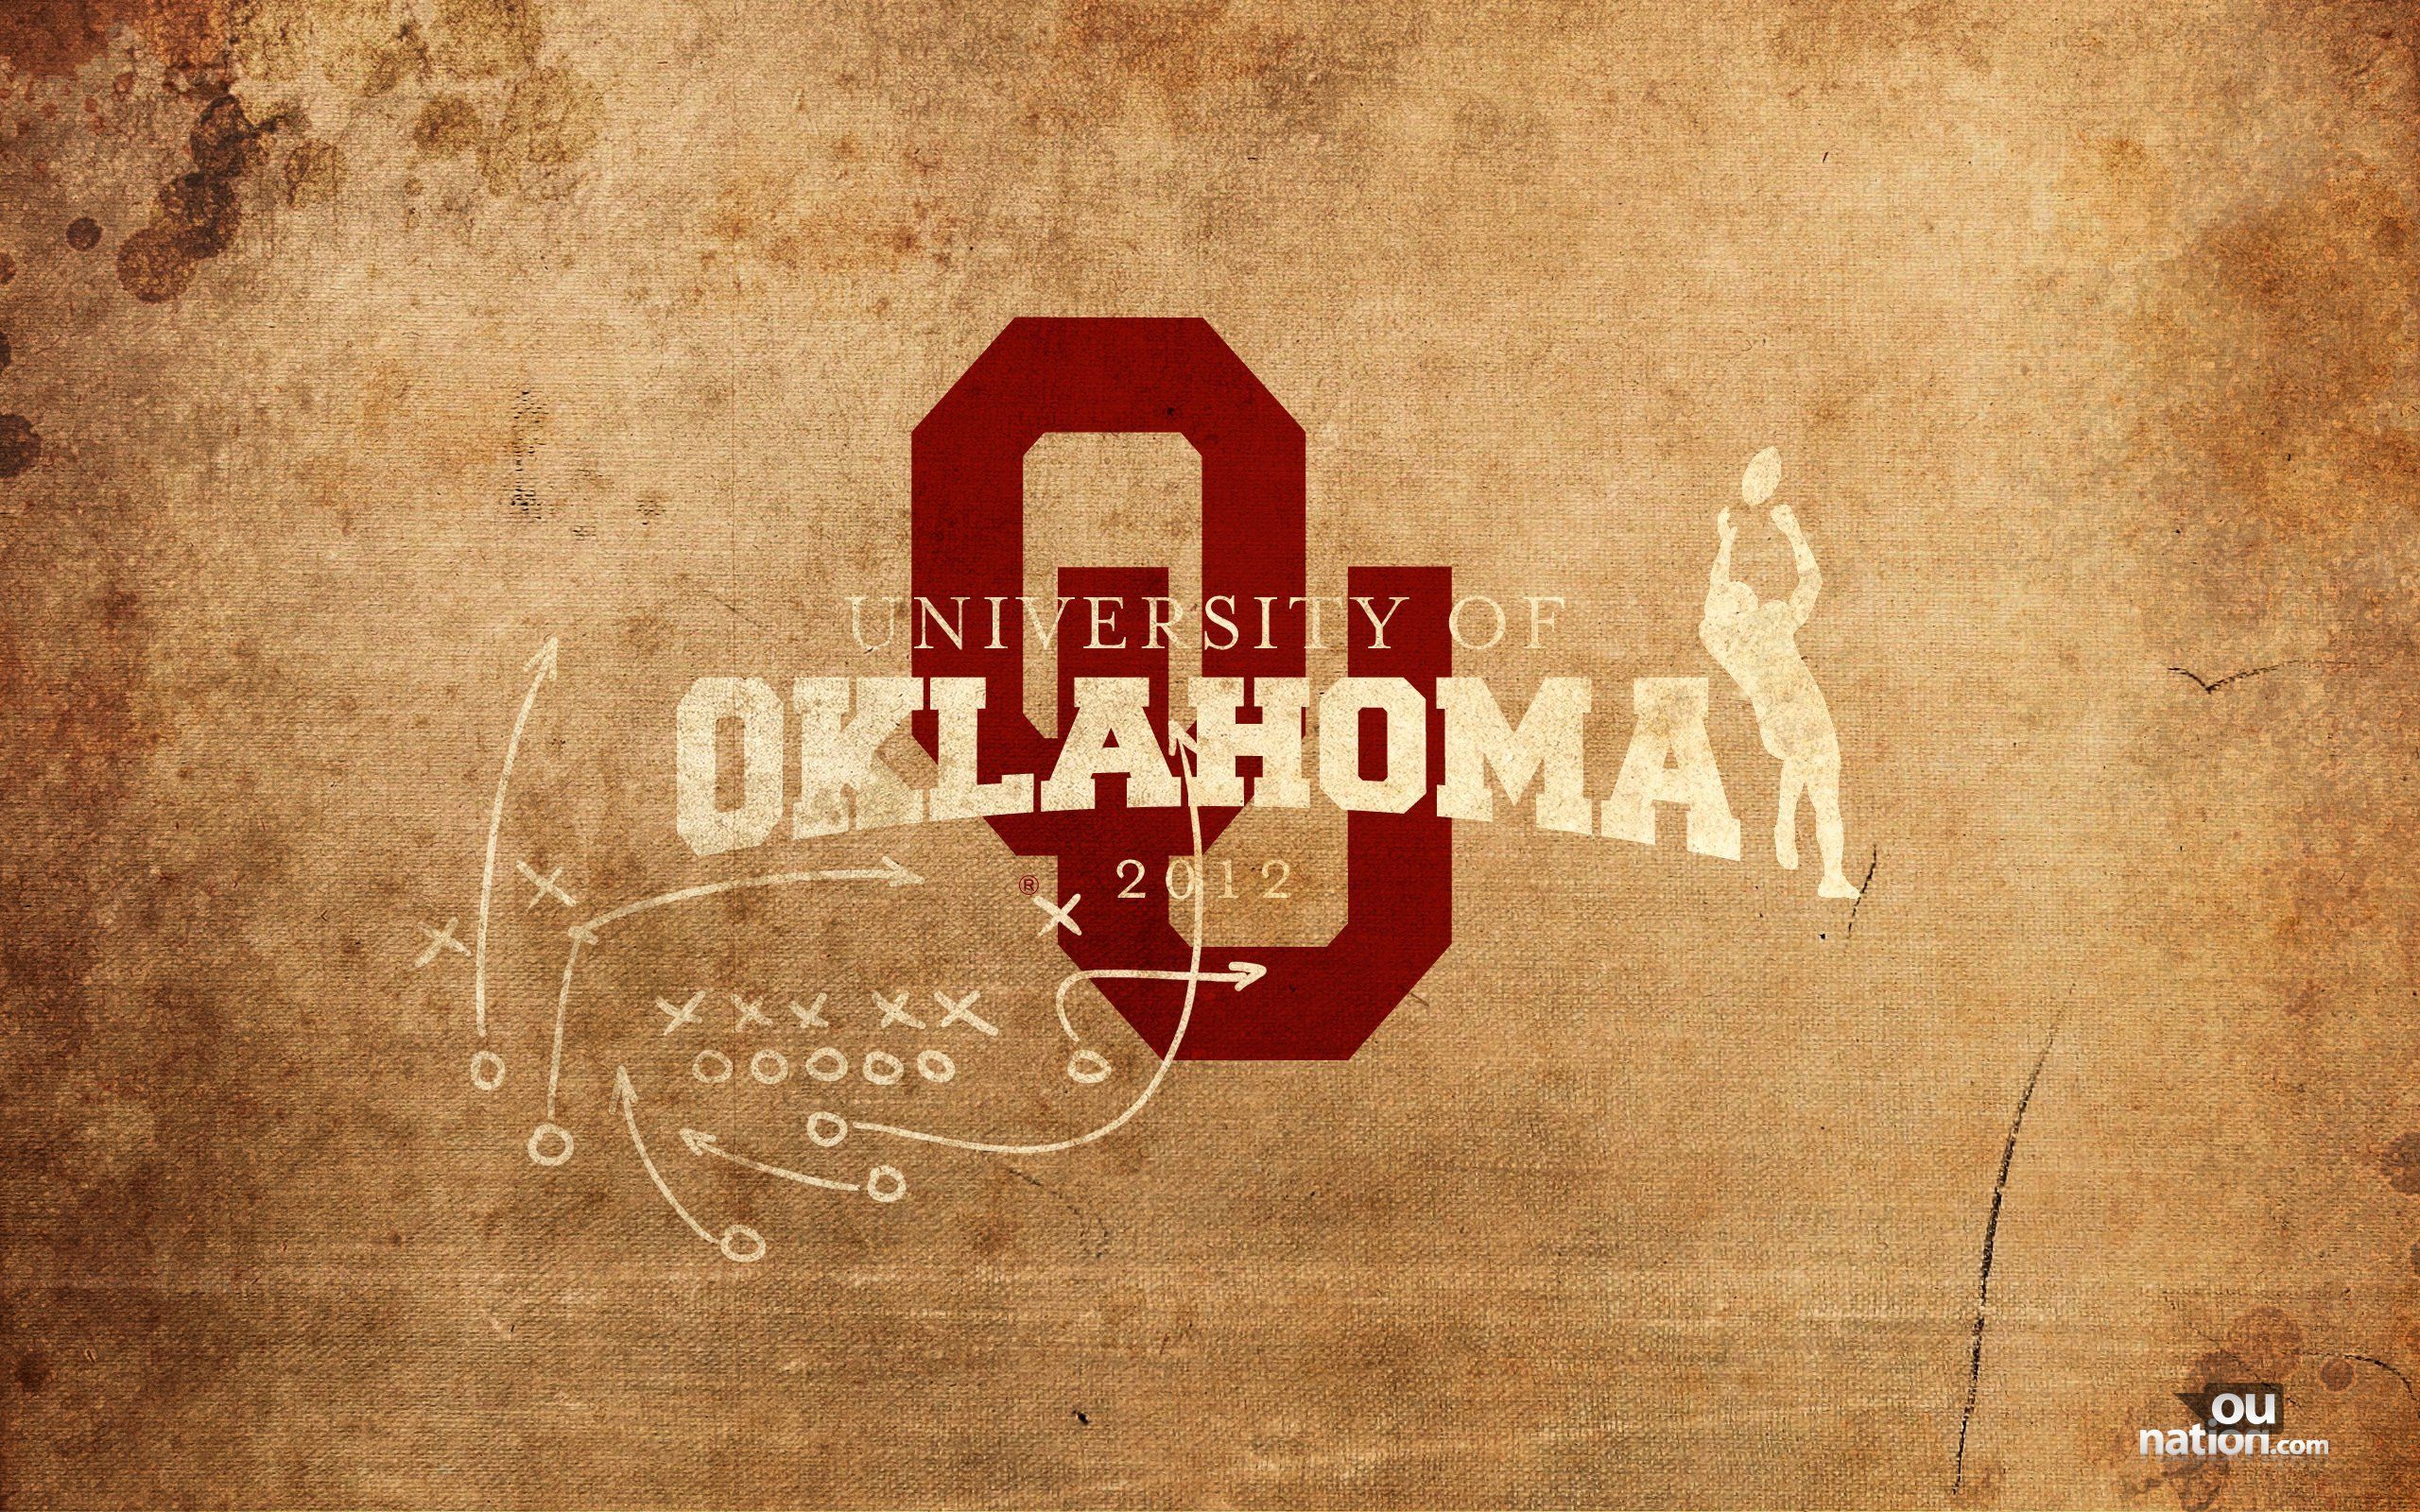 OUnationcom  University of Oklahoma Themed Wallpapers Free for Download